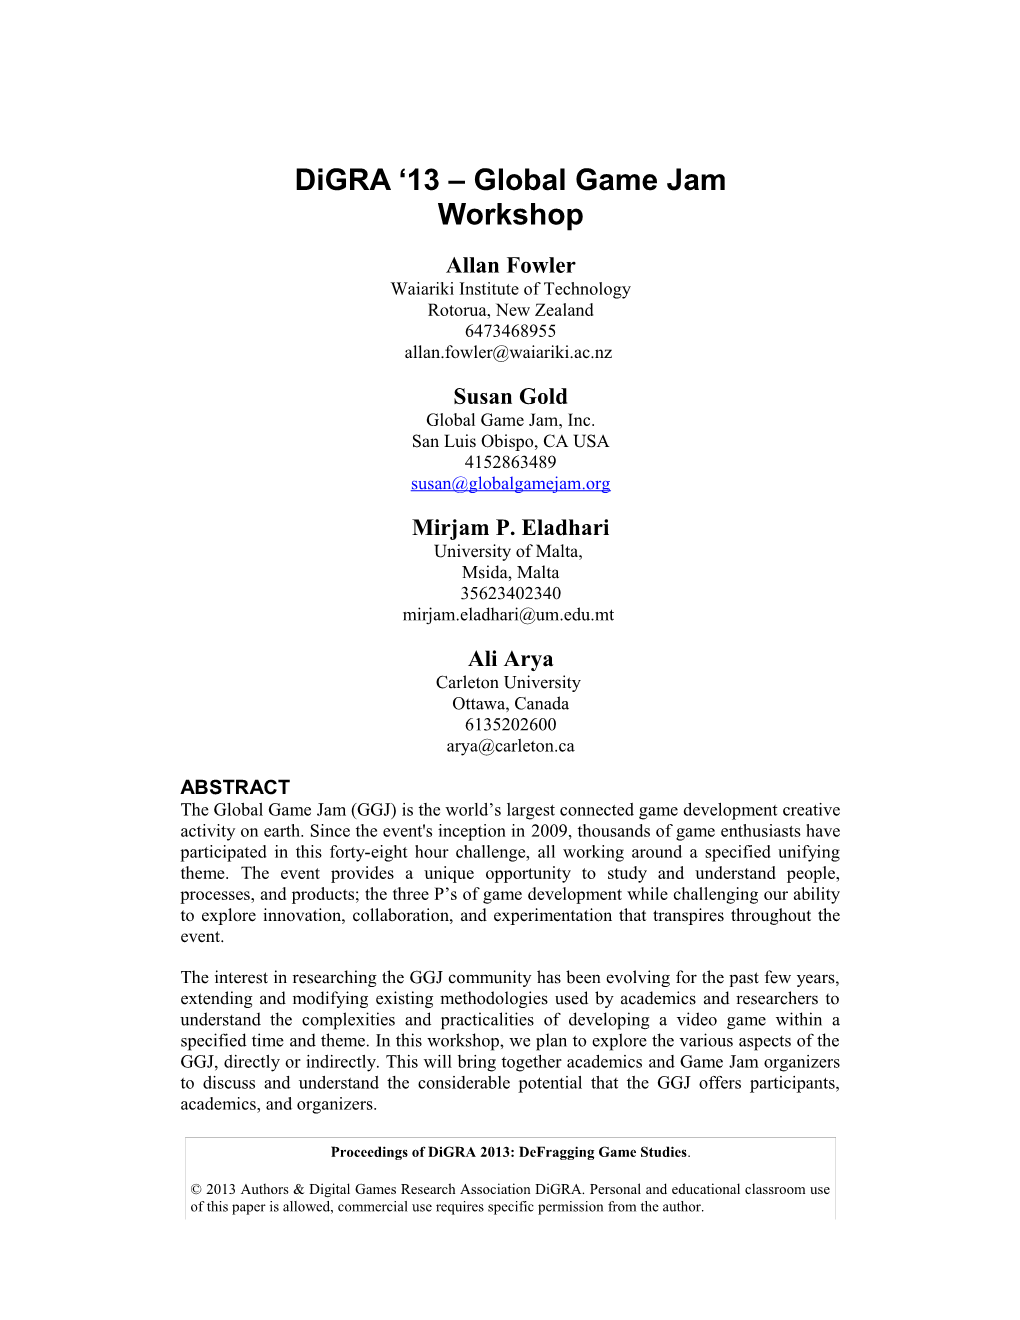 Digra Conference Publication Format s2